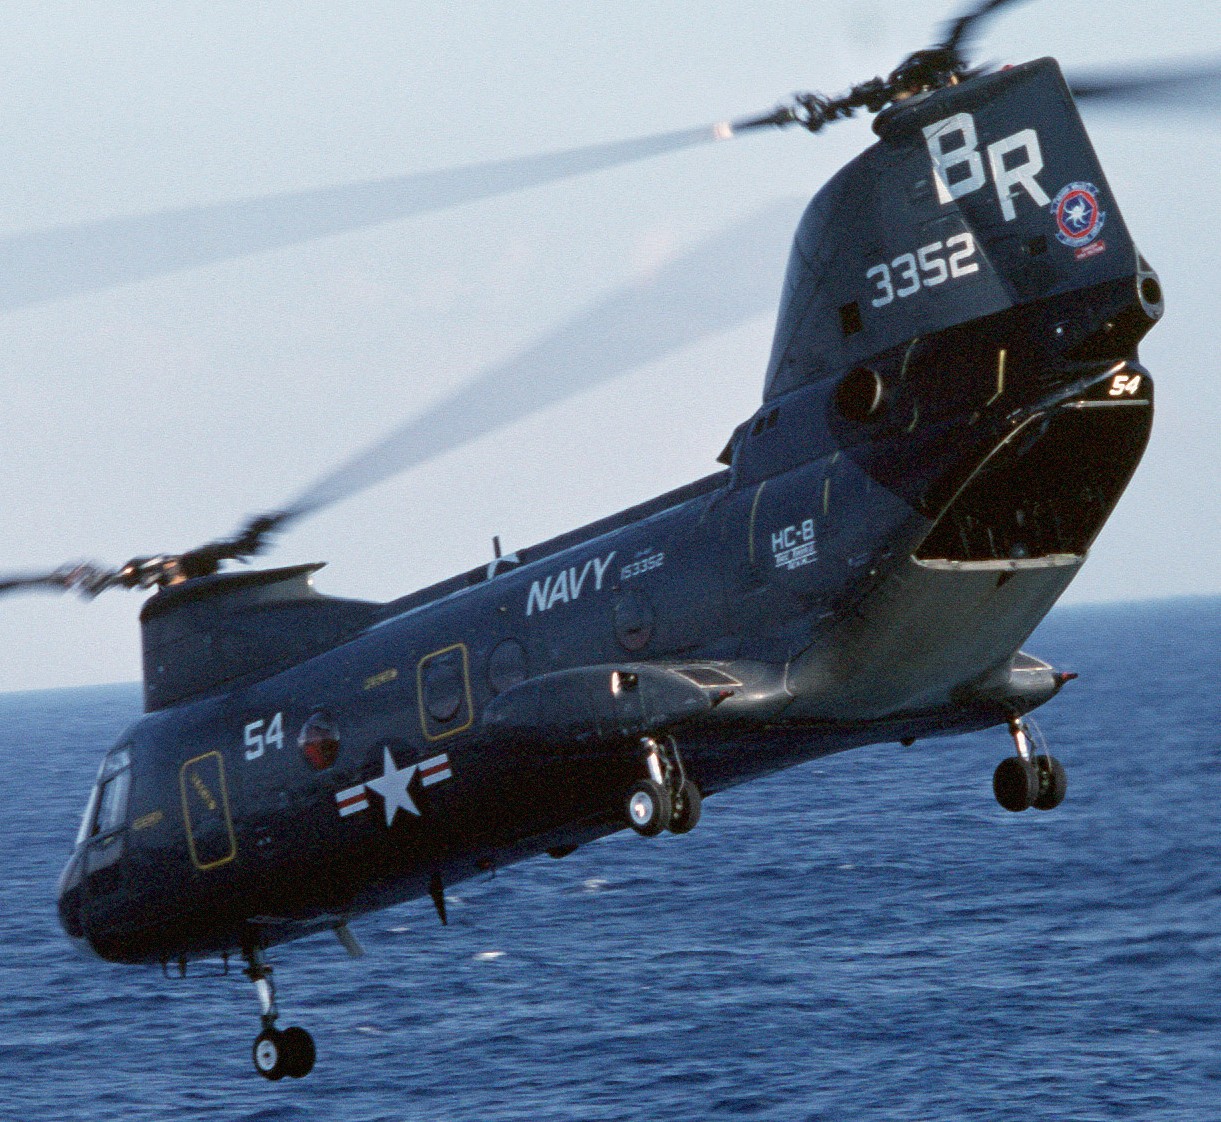 hc-8 dragon whales helicopter combat support squadron navy ch-46 sea knight 27